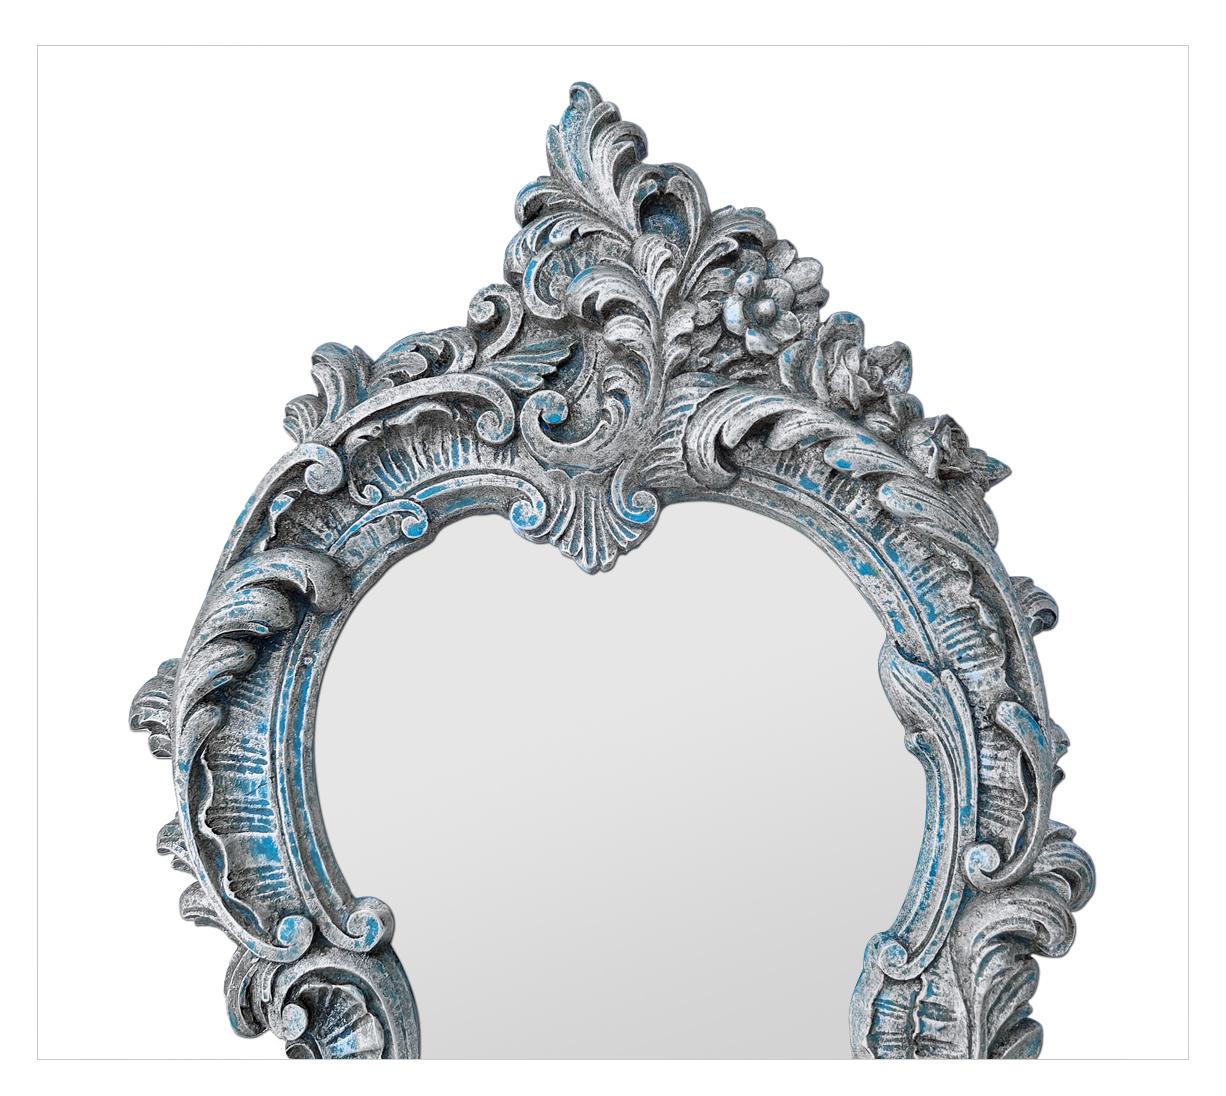 Rare Venetian-style patinated silvered mirror in the shape of an escutcheon. Moulded terra cotta frame from the 1950s, stamped 